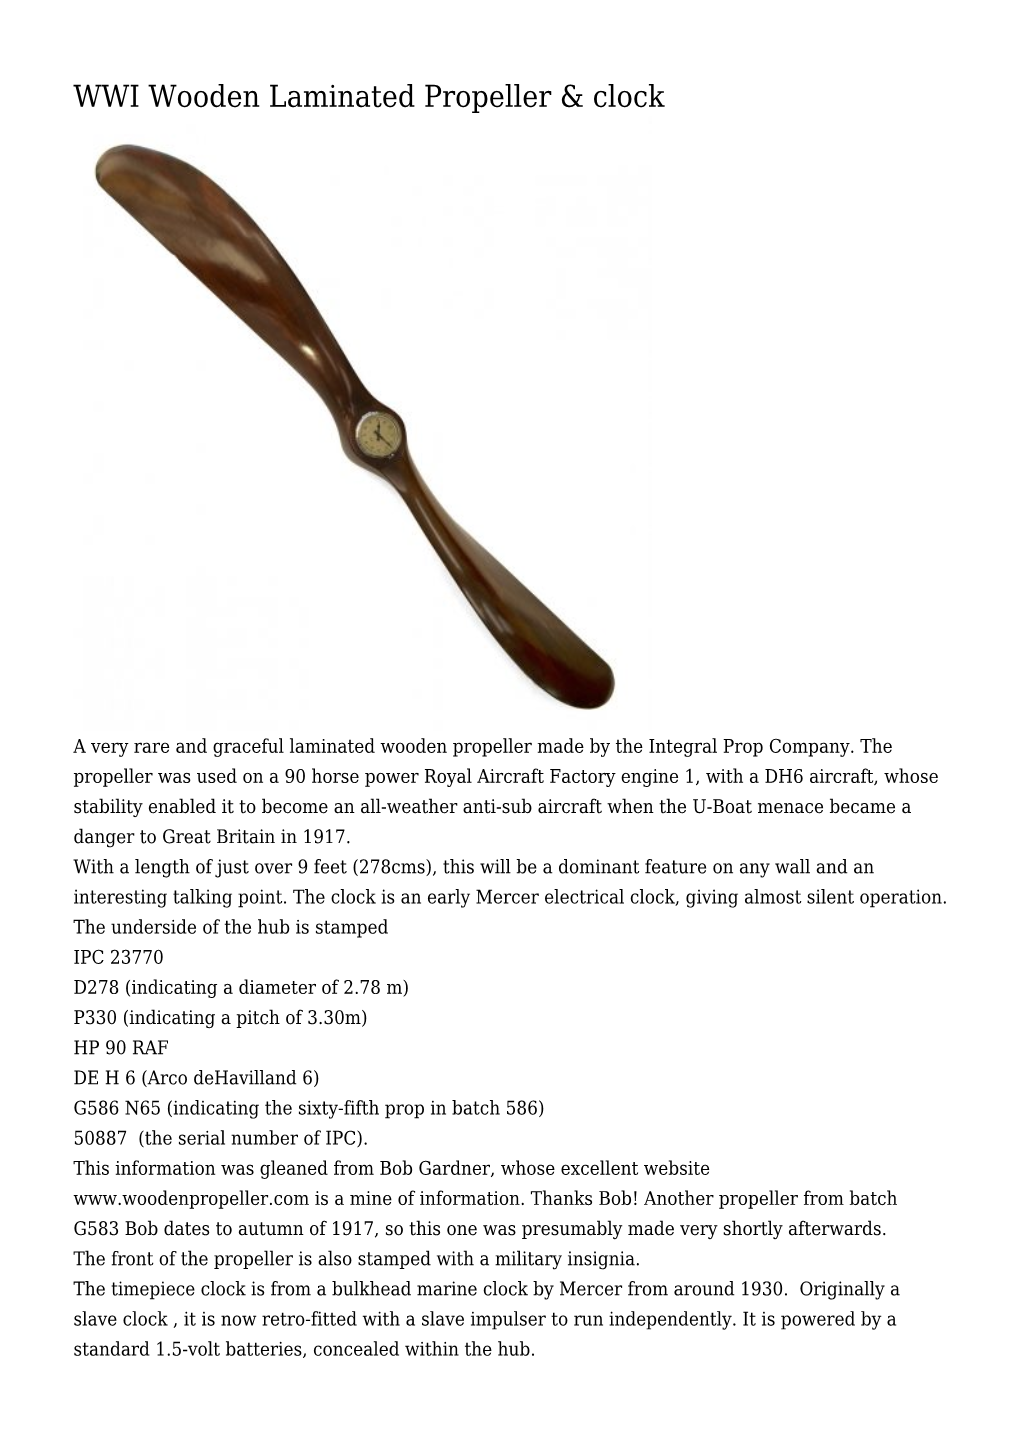 WWI Wooden Laminated Propeller & Clock